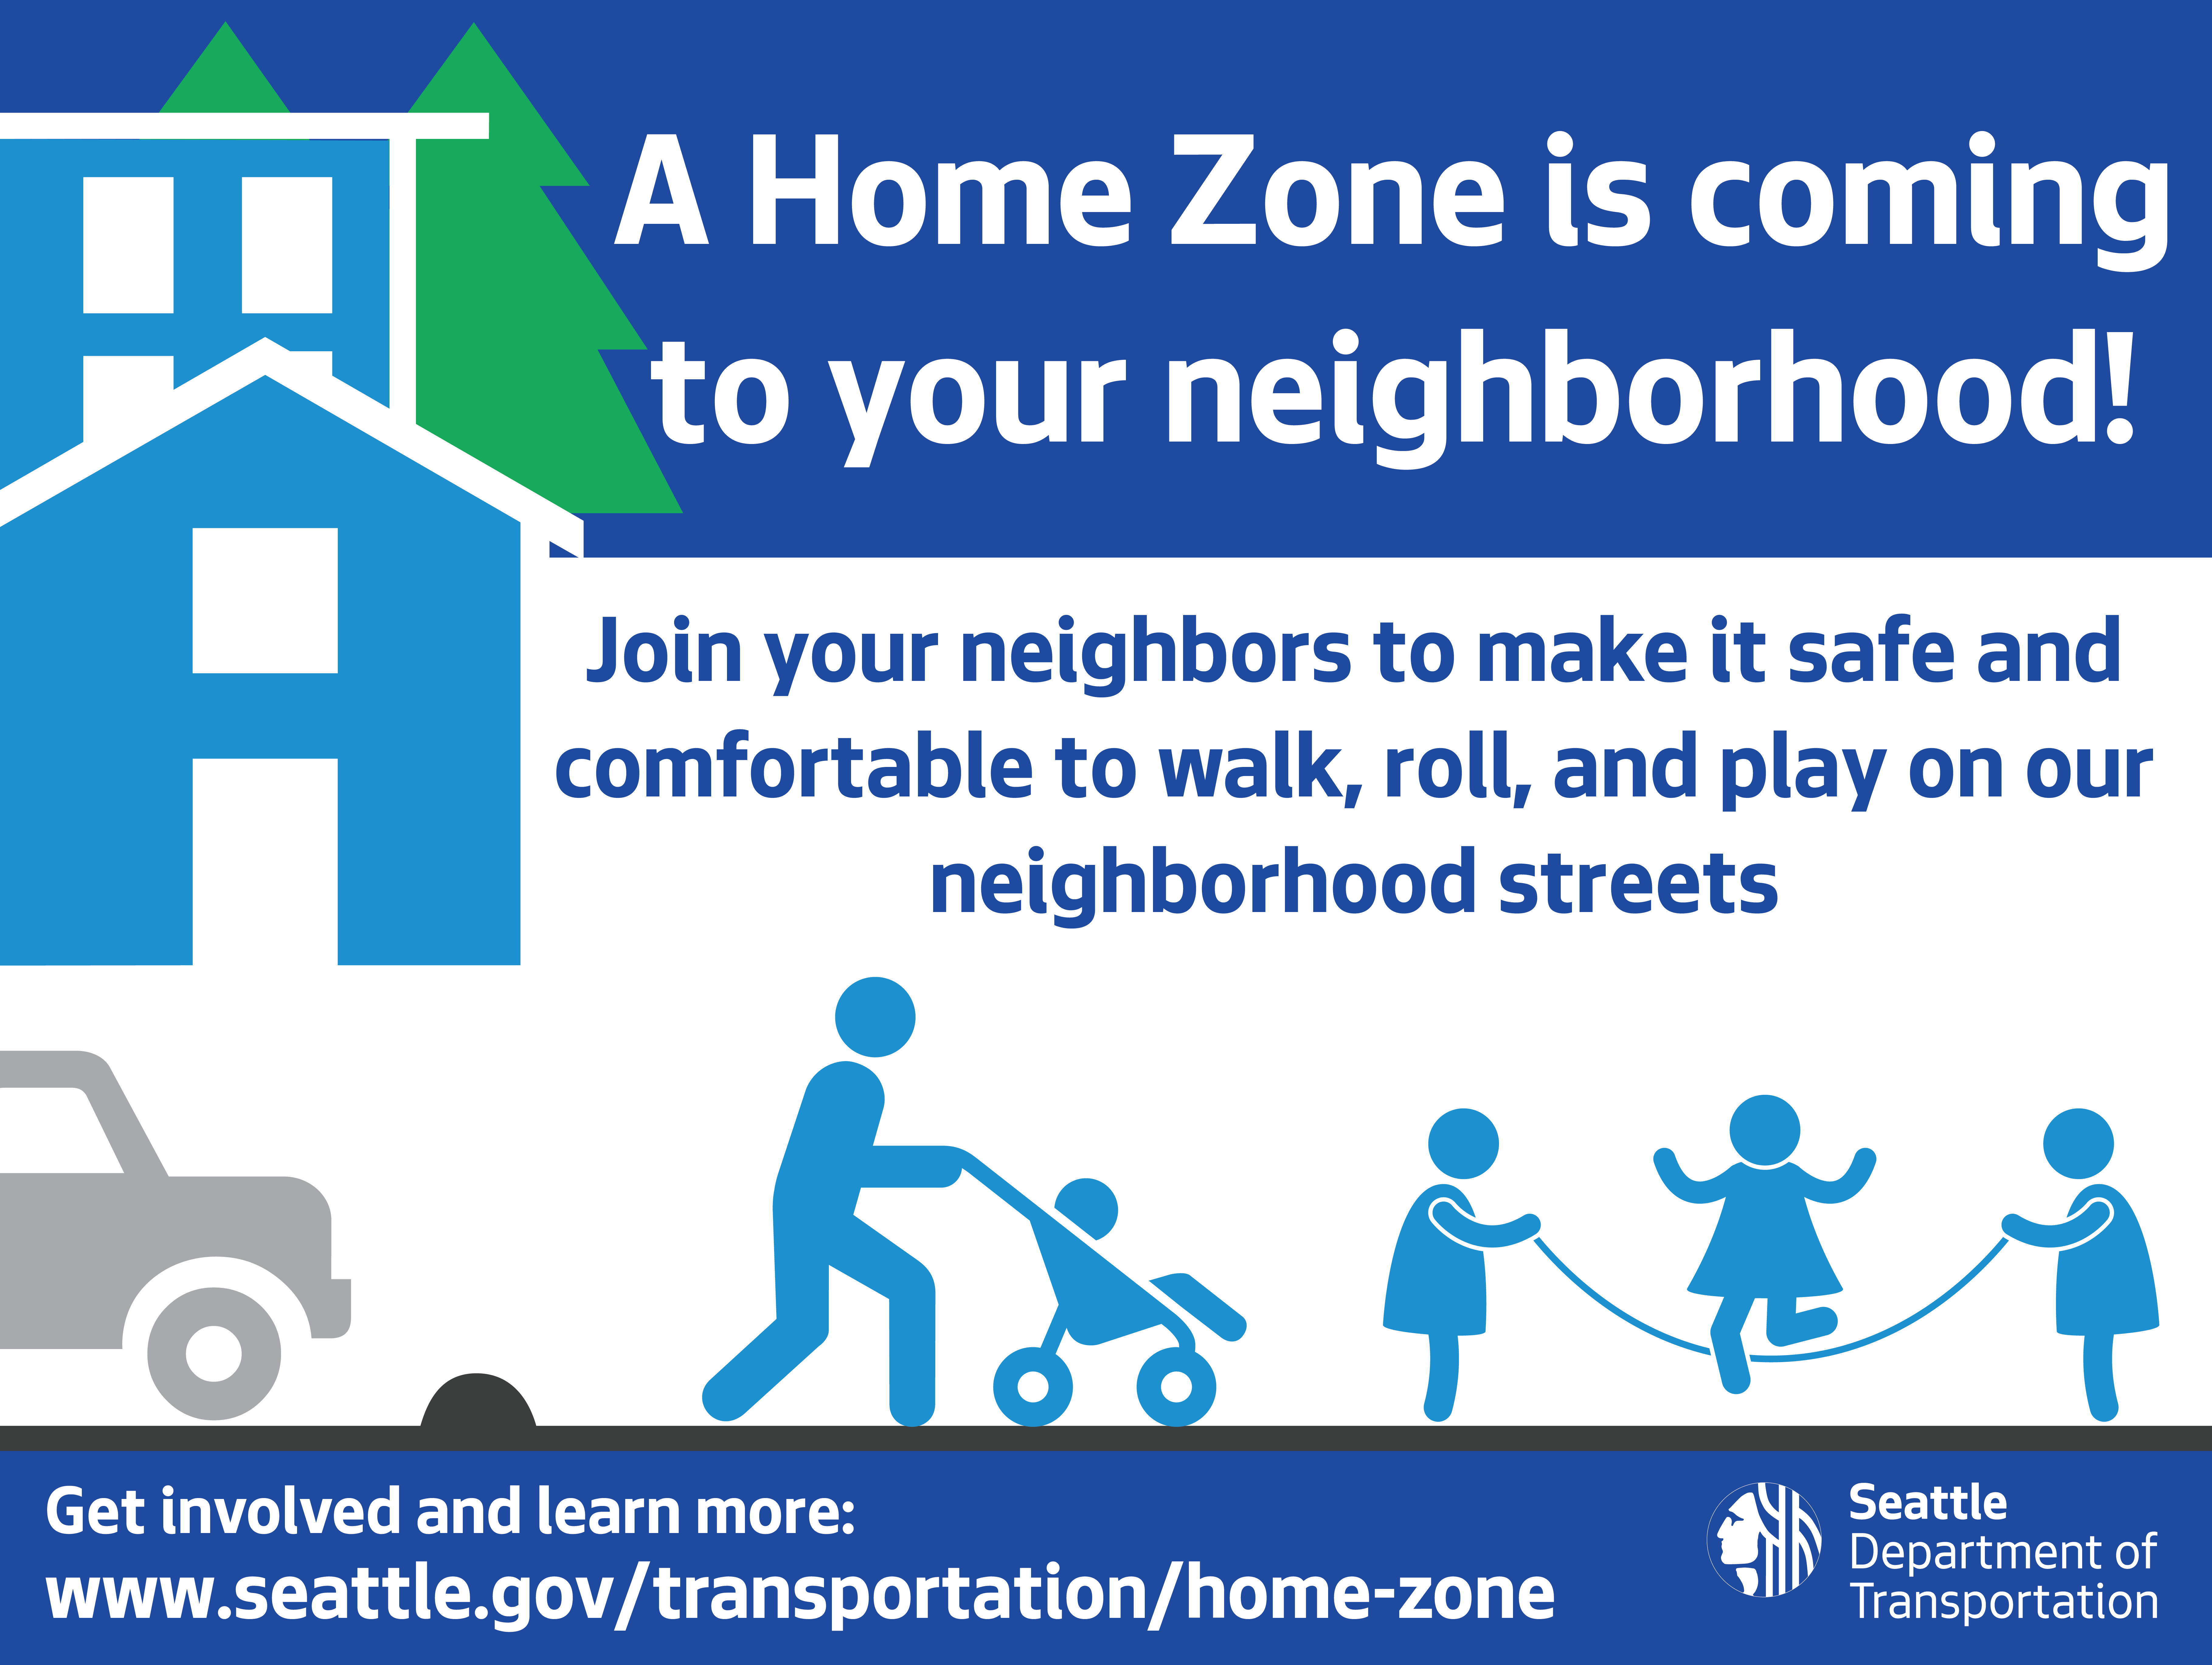 A picture of a yard sign advertising that a Home Zone is coming to the neighborhood.